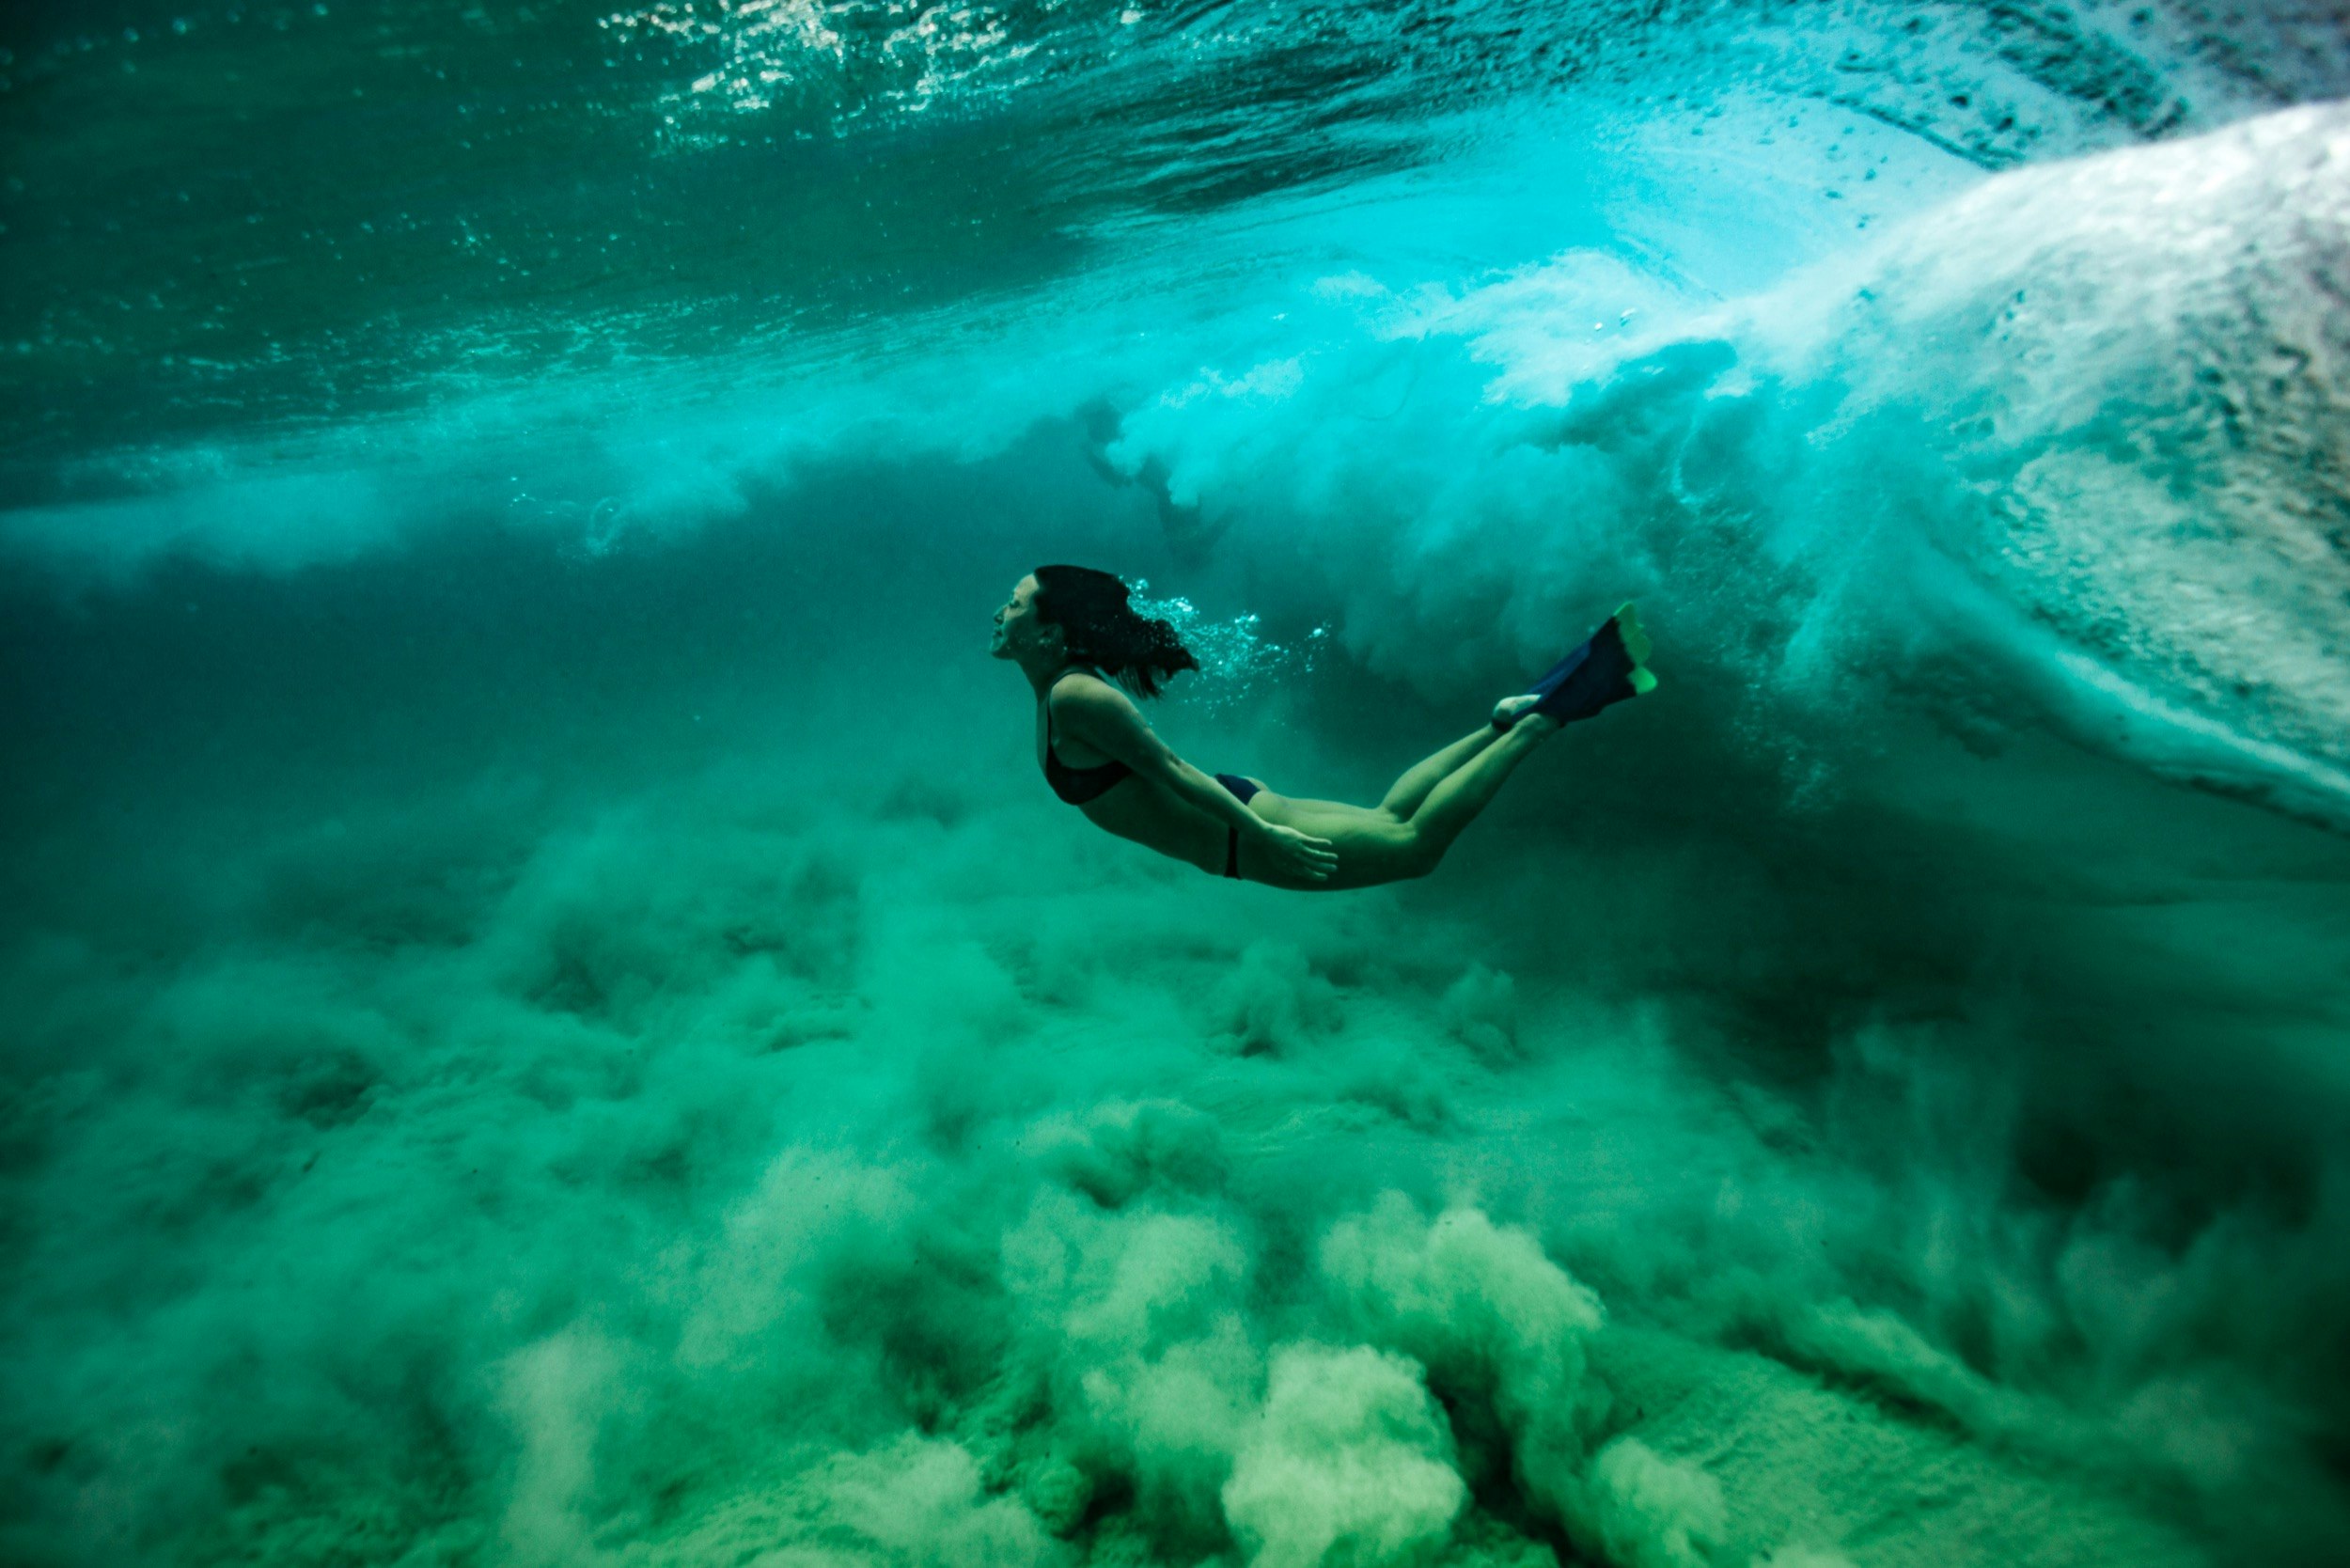 A woman floats underwater with her back arched as a wave crashes behind her head